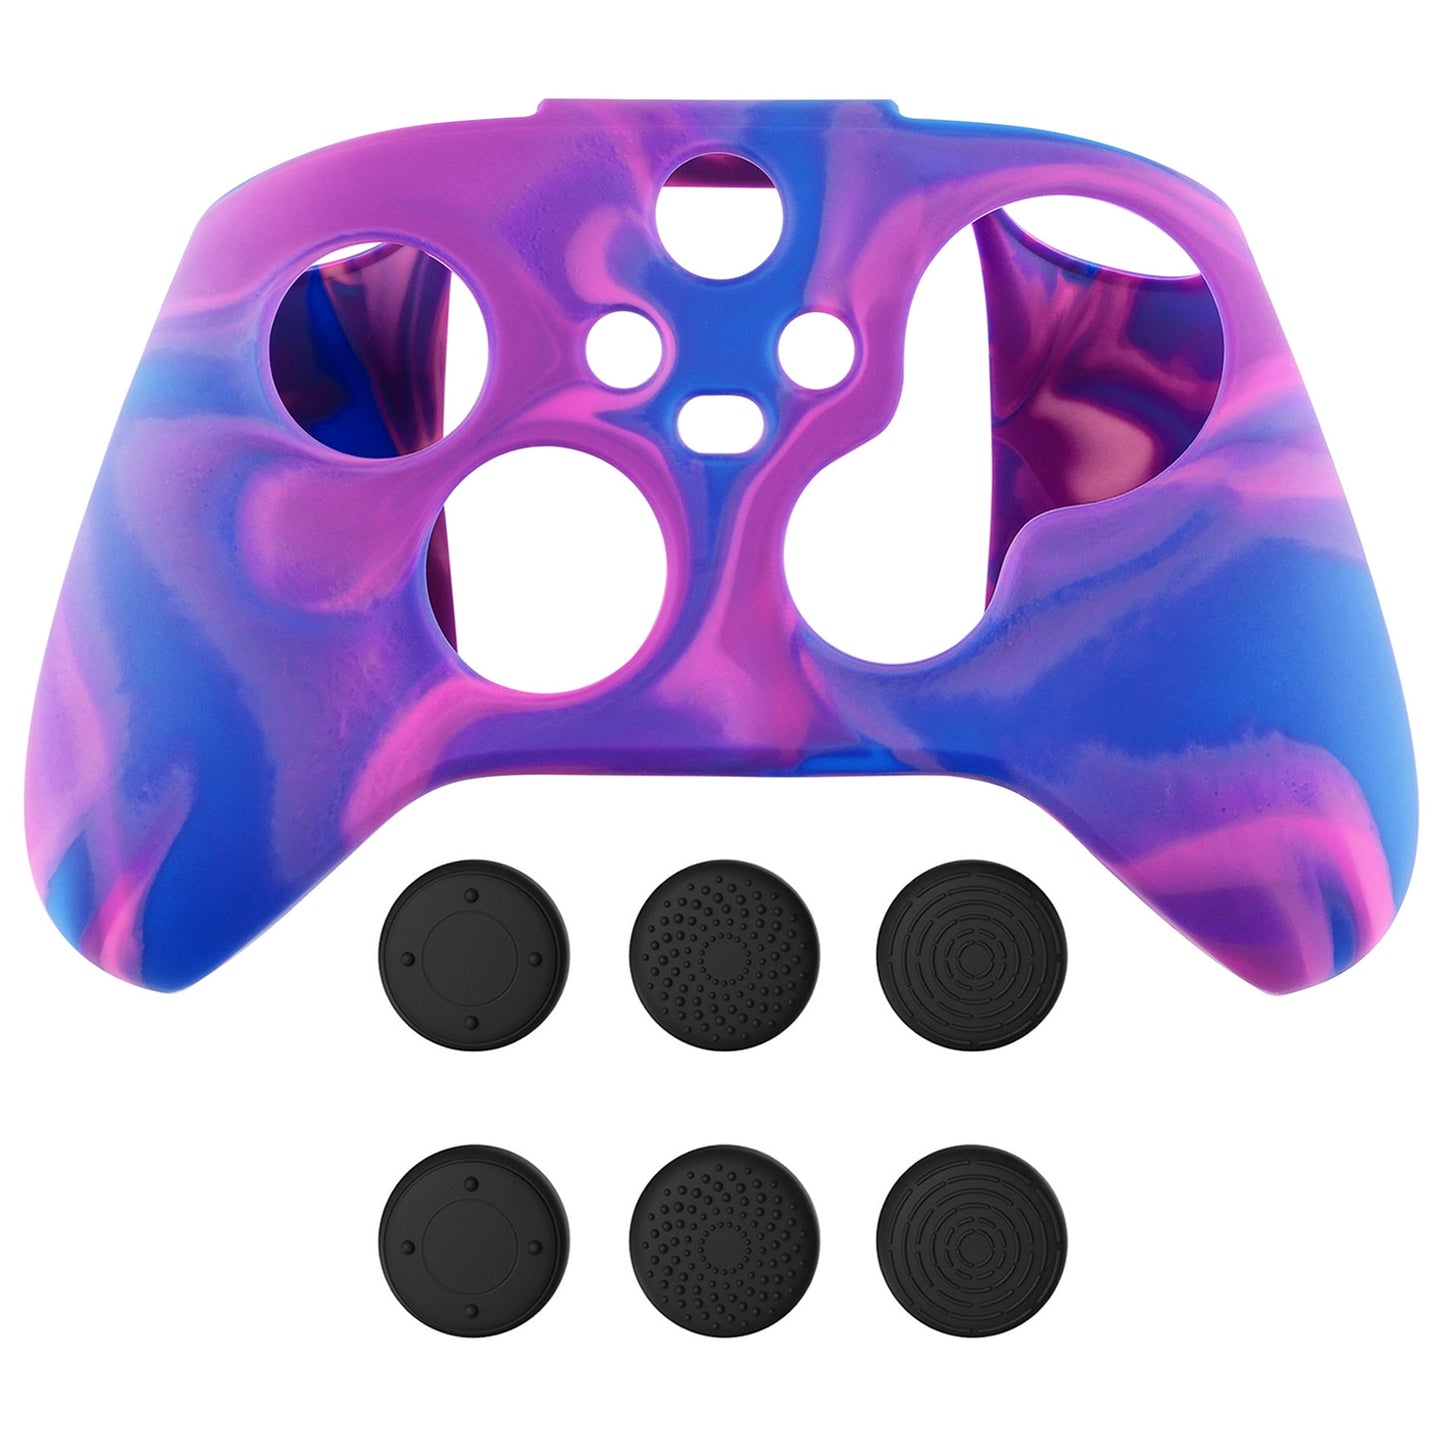 PlayVital Tri-Color Pink & Purple & Blue Camouflage Anti-Slip Silicone Cover Skin for Xbox Series X Controller, Soft Rubber Case Protector for Xbox Series S Controller with Black Thumb Grip Caps - BLX3015 PlayVital